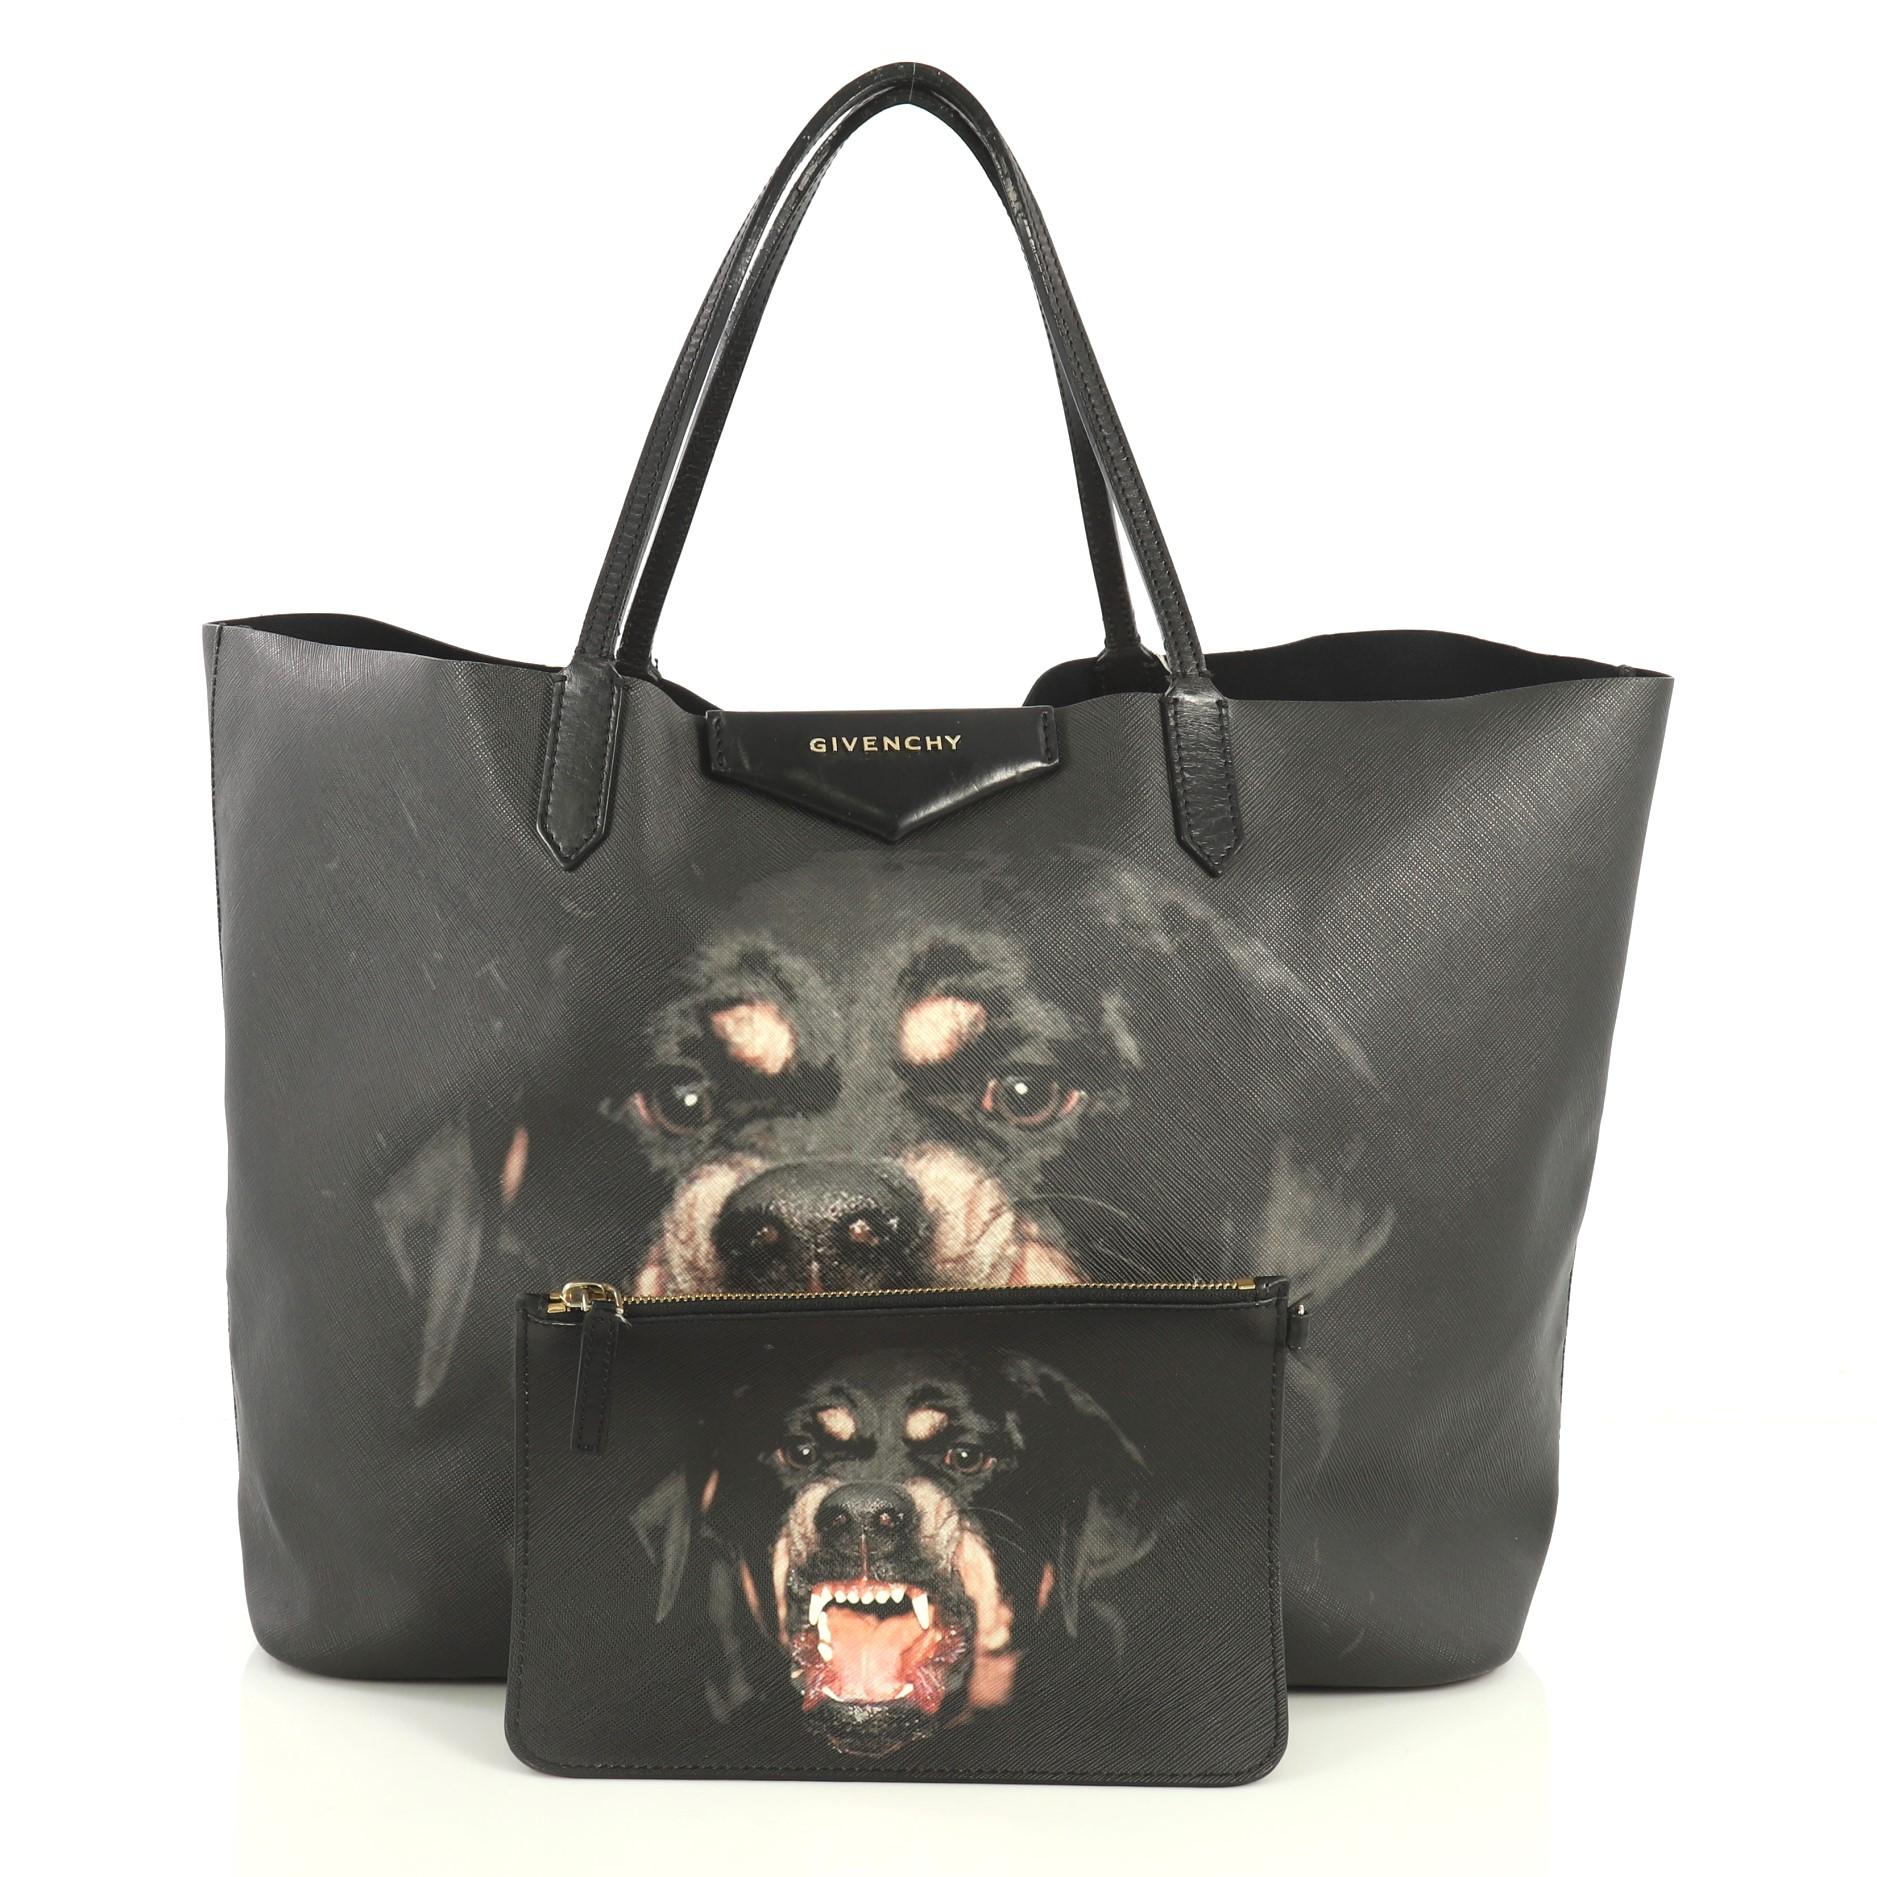 This Givenchy Antigona Shopper Printed Coated Canvas Large, crafted in black coated canvas, features dual-leather slim handles, an oversized Rottweiler dog print, Givenchy's raised envelope logo, and gold-tone hardware. Its wide open top showcases a